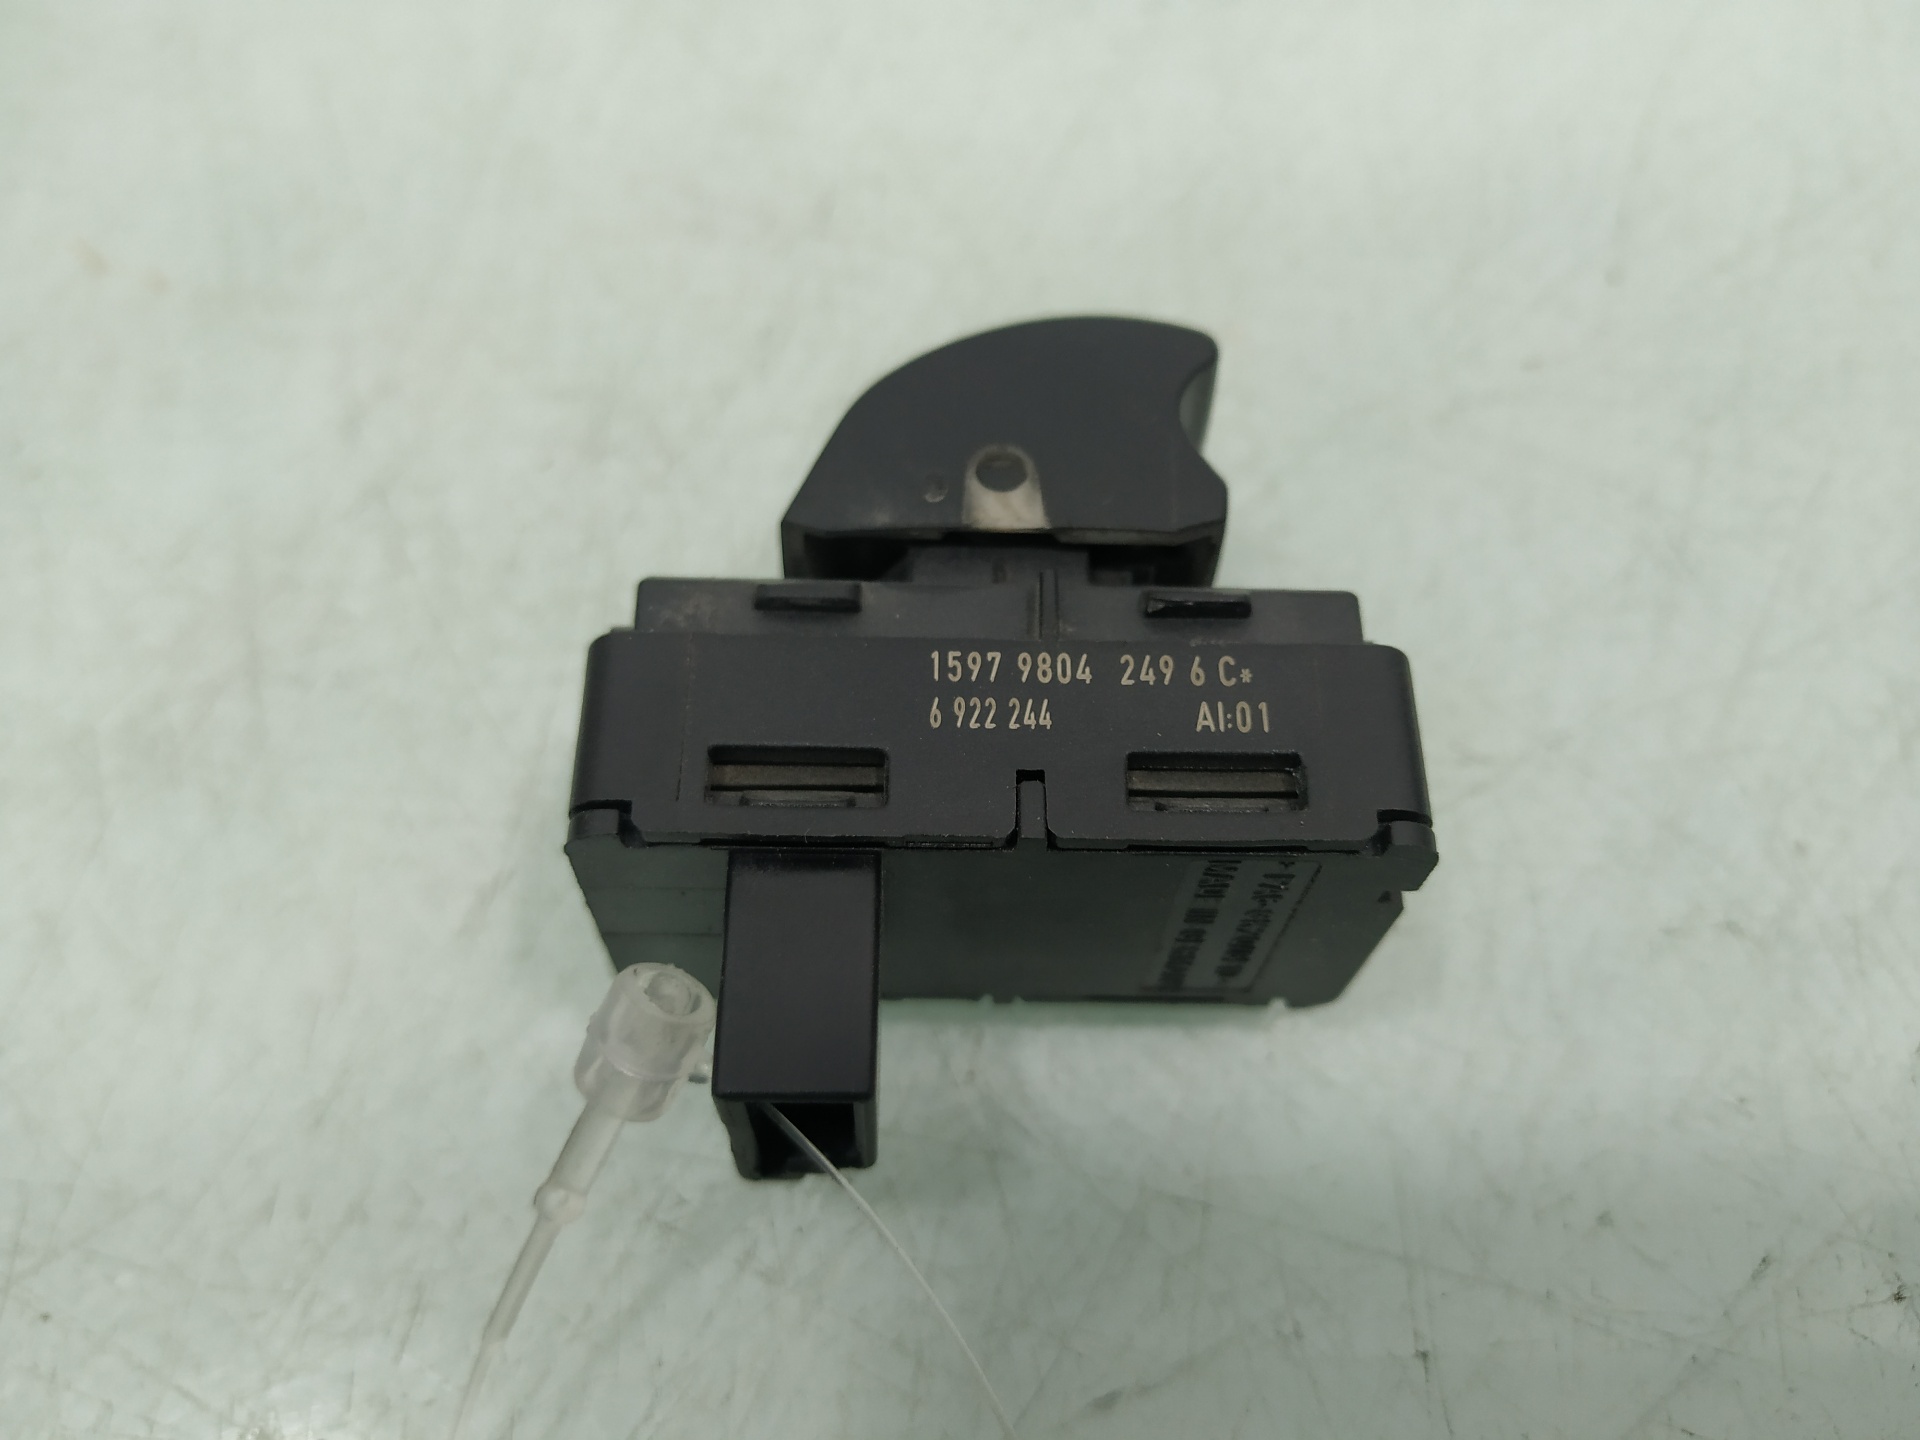 BMW X3 E83 (2003-2010) Front Right Door Window Switch 6922244 24916323